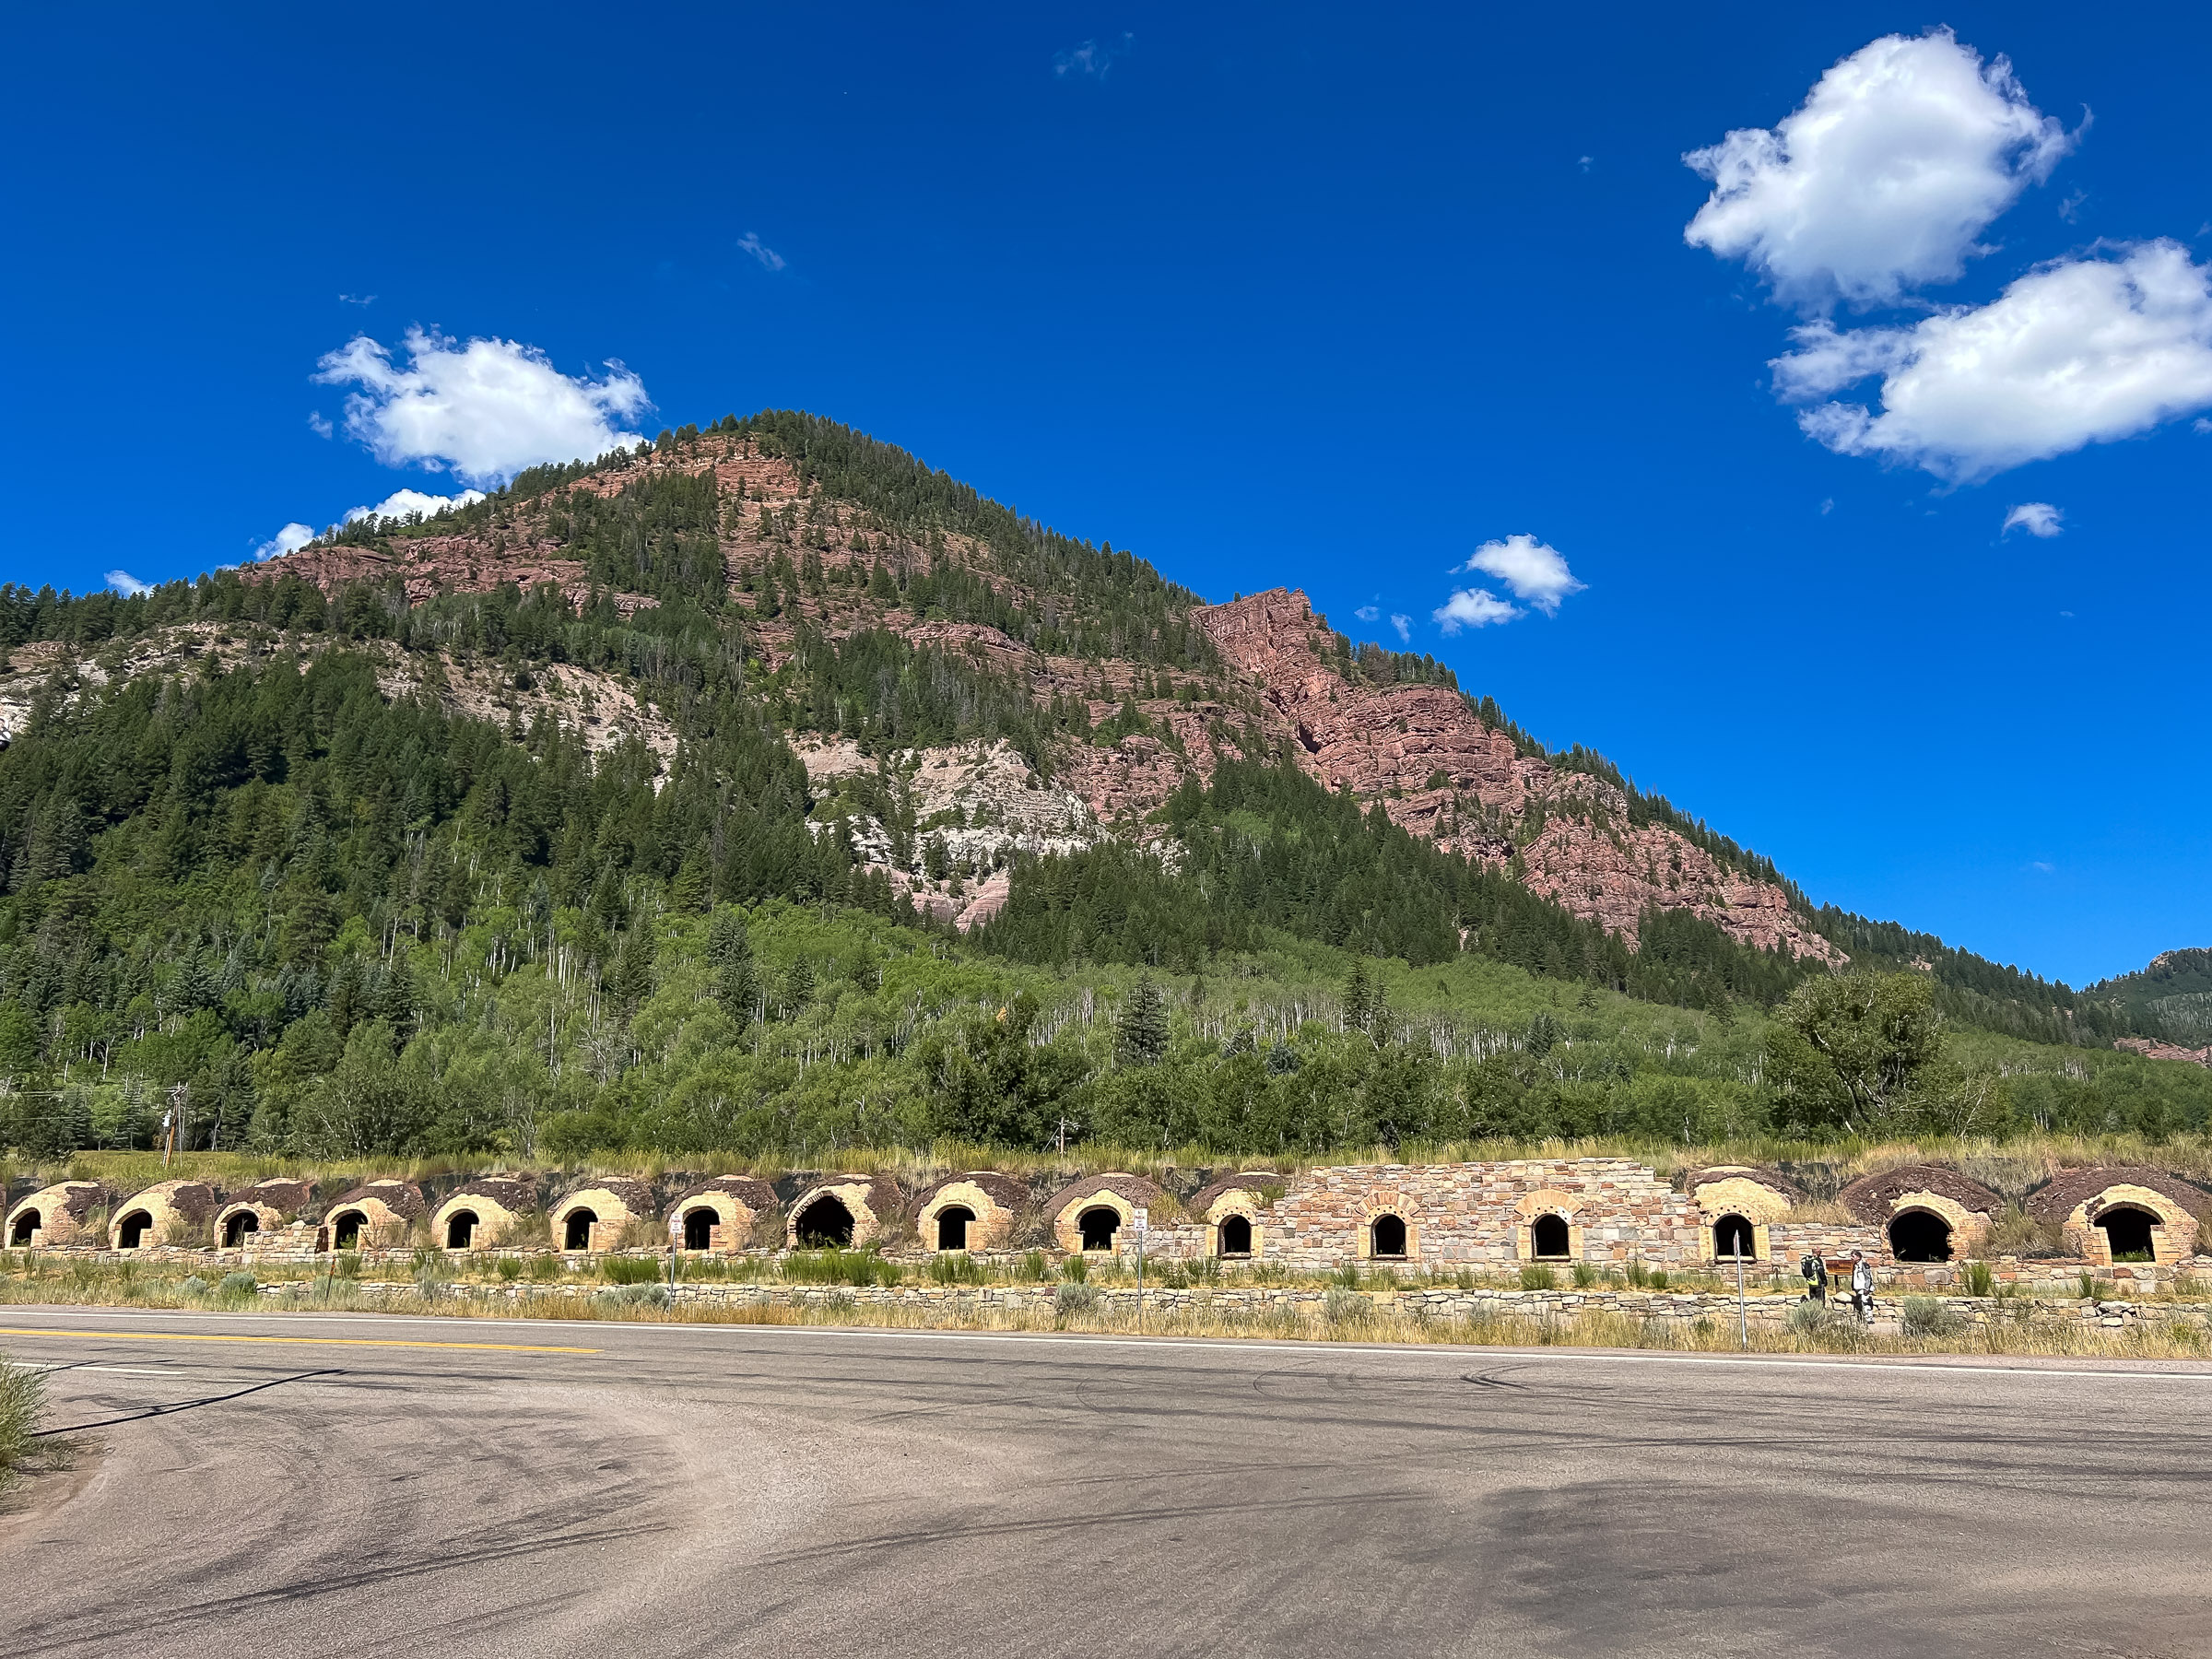 Remaining coke ovens built in 1899  by the Colorado Fuel and Iron Company. The ovens burned impurities out of the coal (2400 deg) so it could be used to make steel.